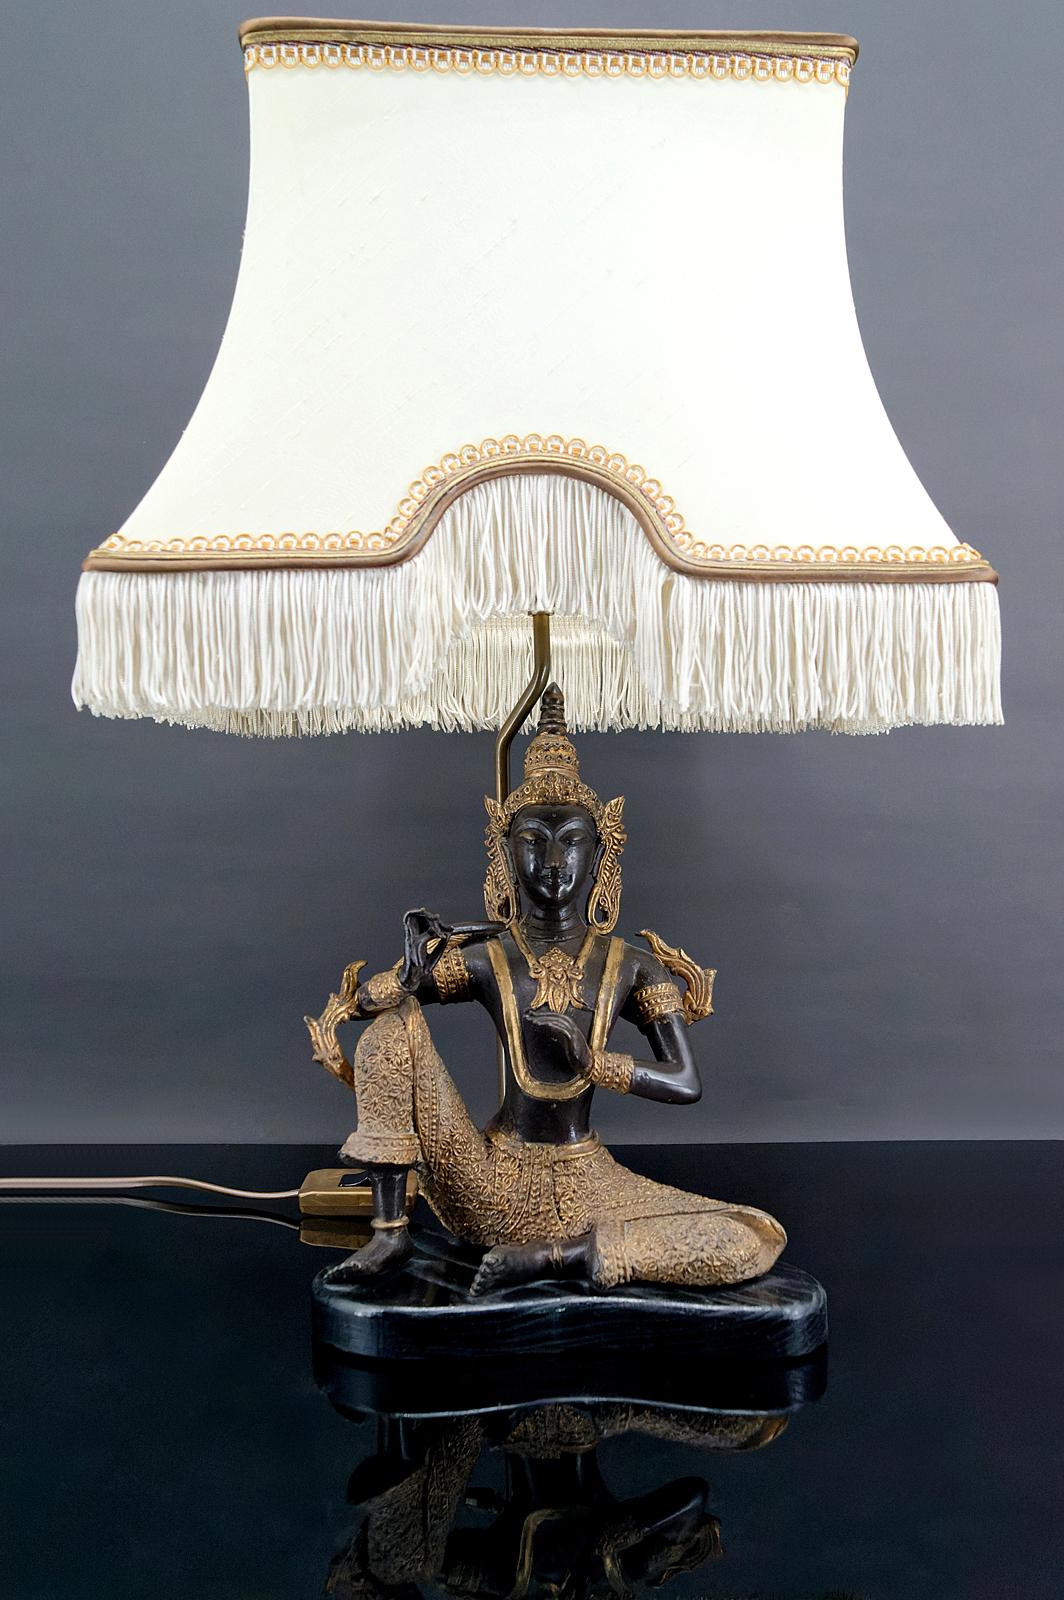 Thai bronze with double black and gold patina mounted as a lamp on a blackened wooden base.
Very beautiful pagoda lampshade.
Beautiful work by a French decorator from the 1960s, in the style of the productions of Maisons Charles and Jansen.

In very